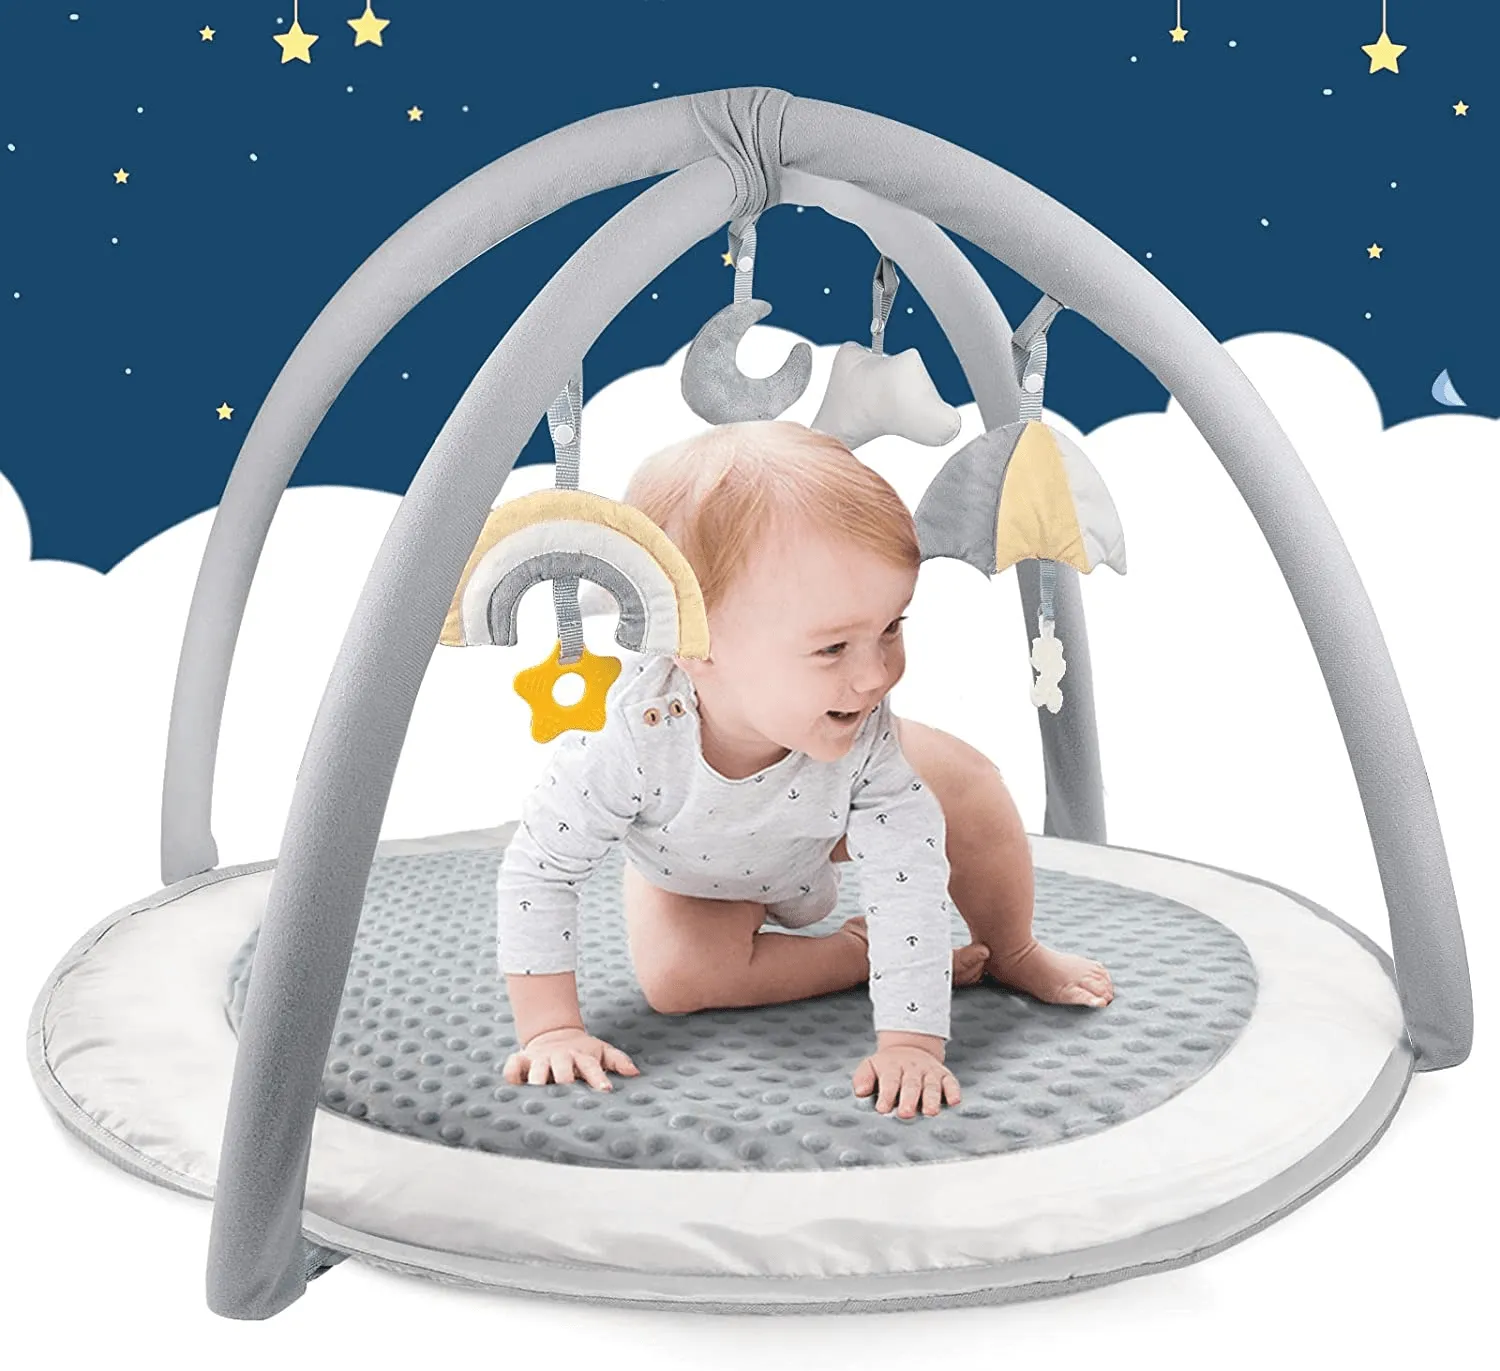 Trongle Baby Play Gym Mat